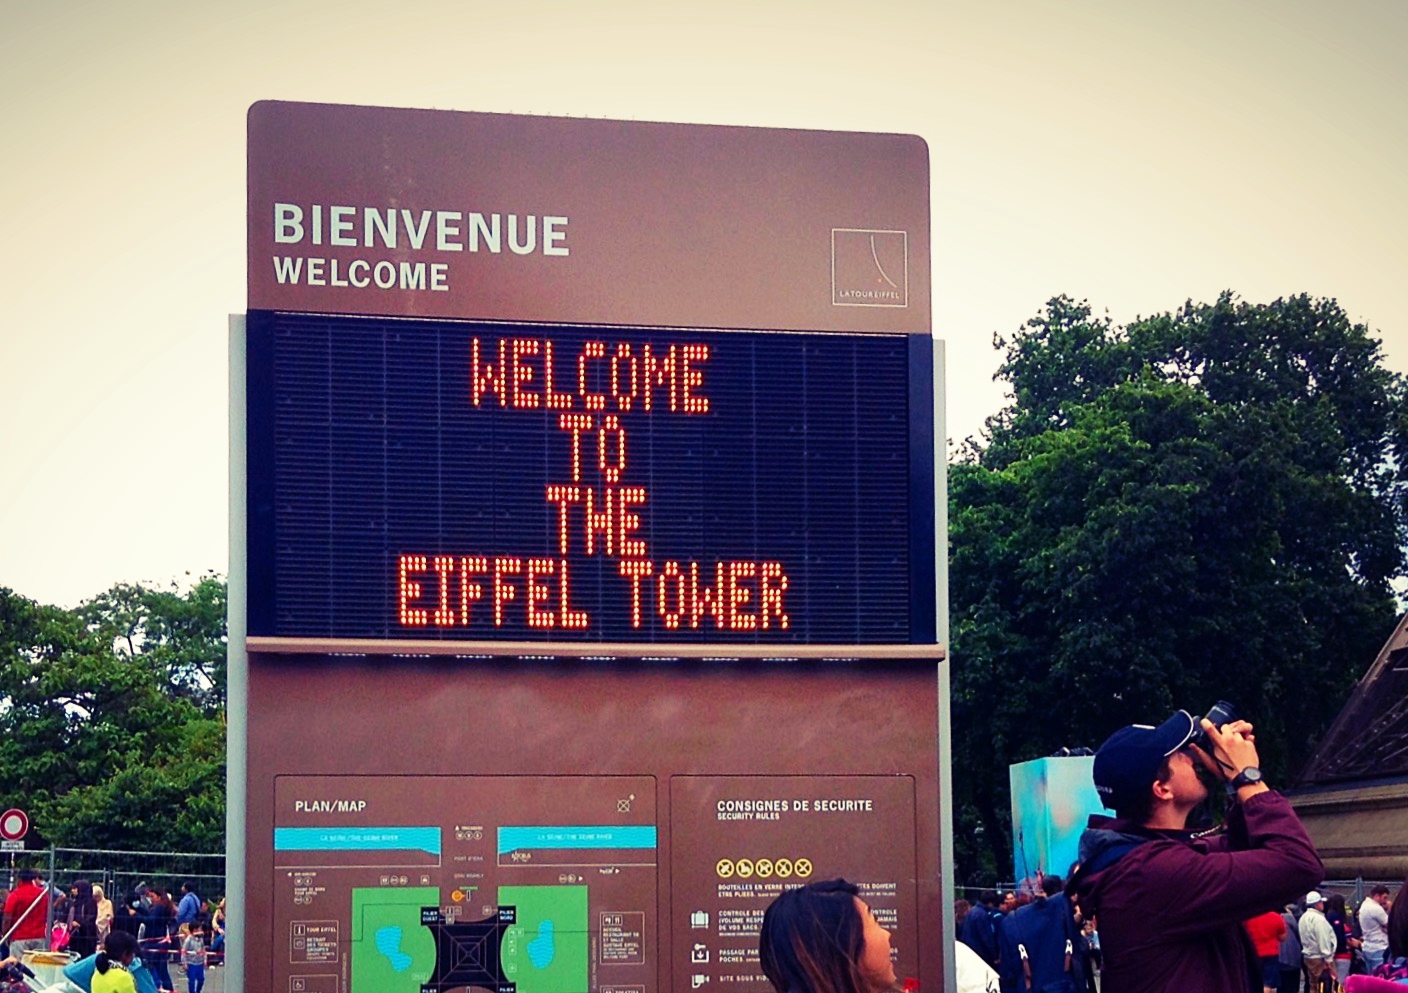 Eiffel Tower is Re-opening on June 25 2020